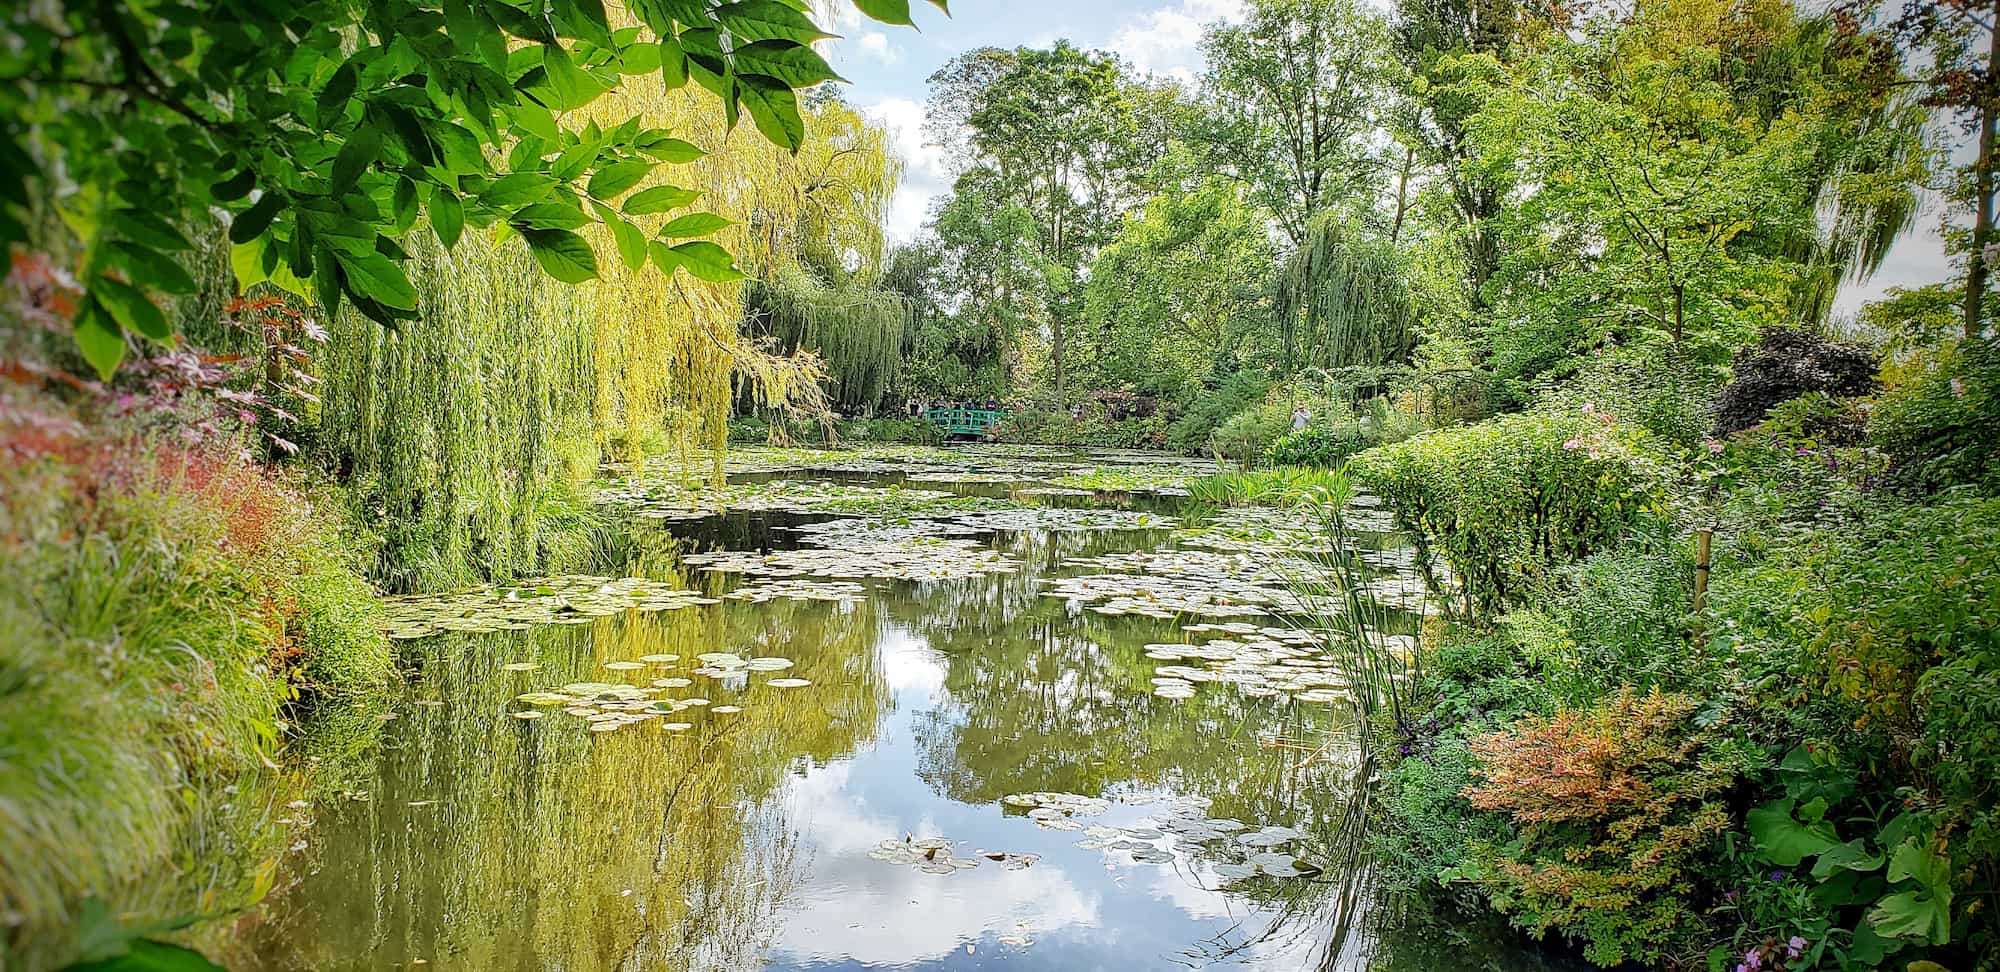 Claude Monet's home in Giverny